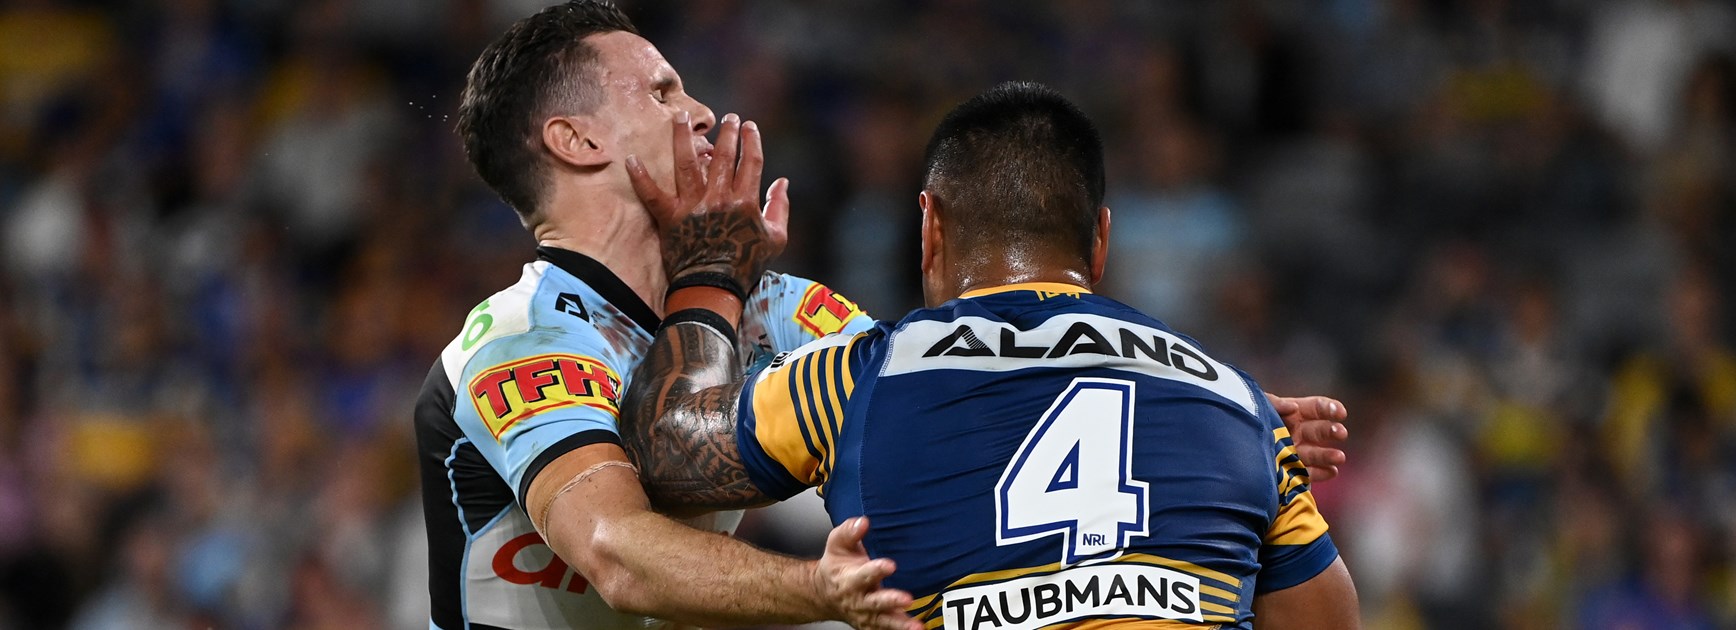 Morris calls for 18th man as knockout blows floor brave Sharks